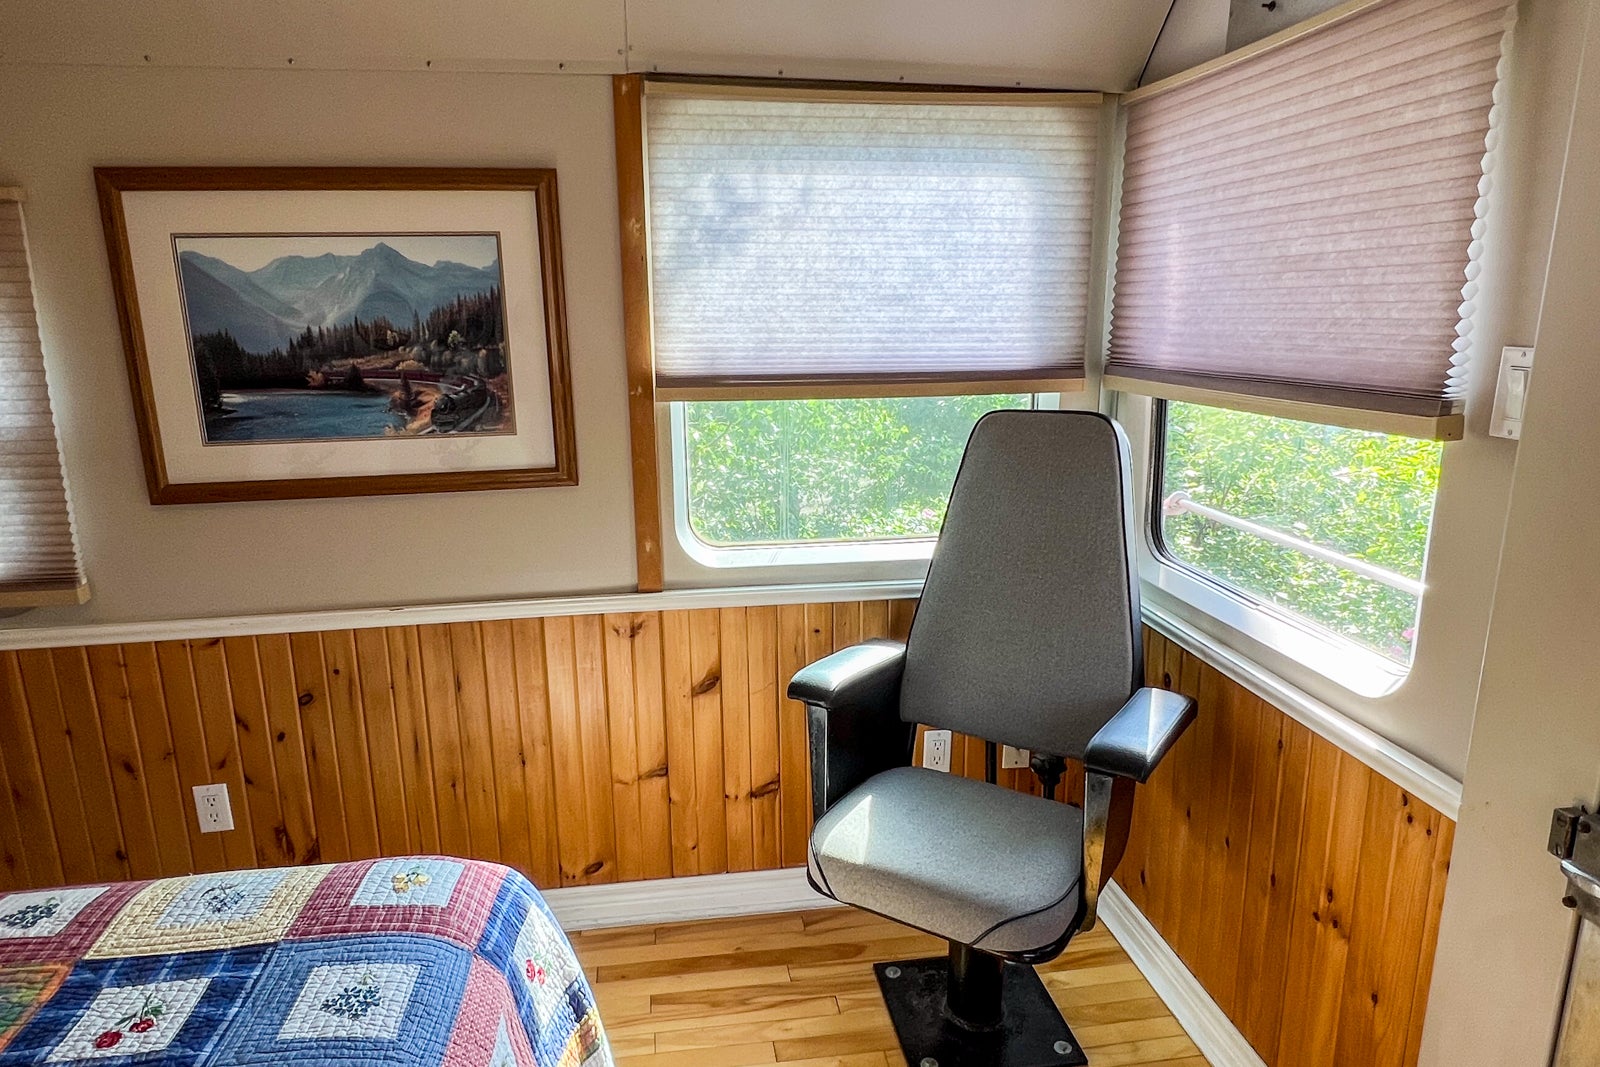 A conductors chair in the bedroom of Caboose #8 at the Train Station Inn in Tatamagouche, Nova Scotia